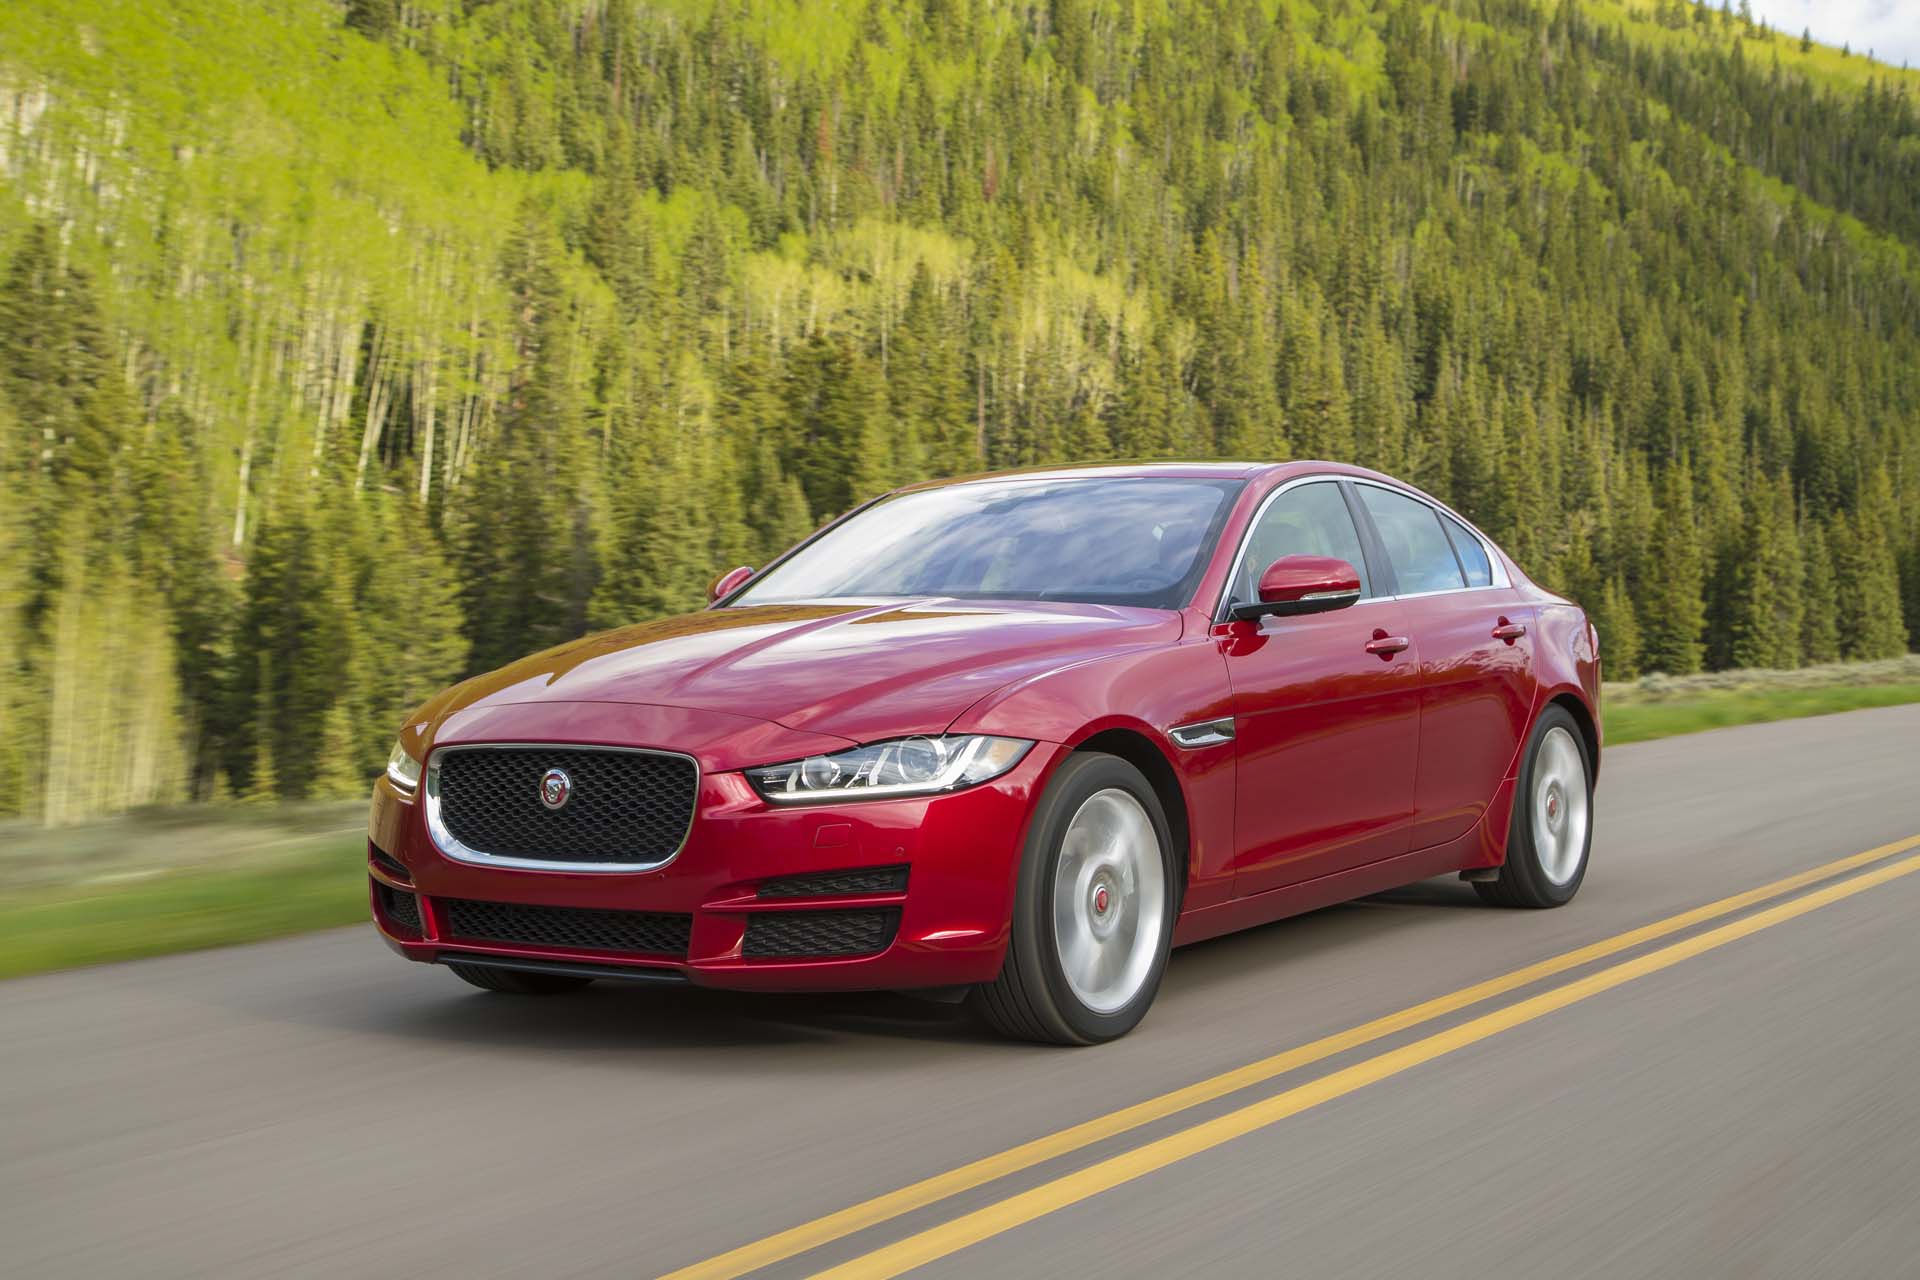 2018 Jaguar XE Review, Ratings, Specs, Prices, and Photos - The